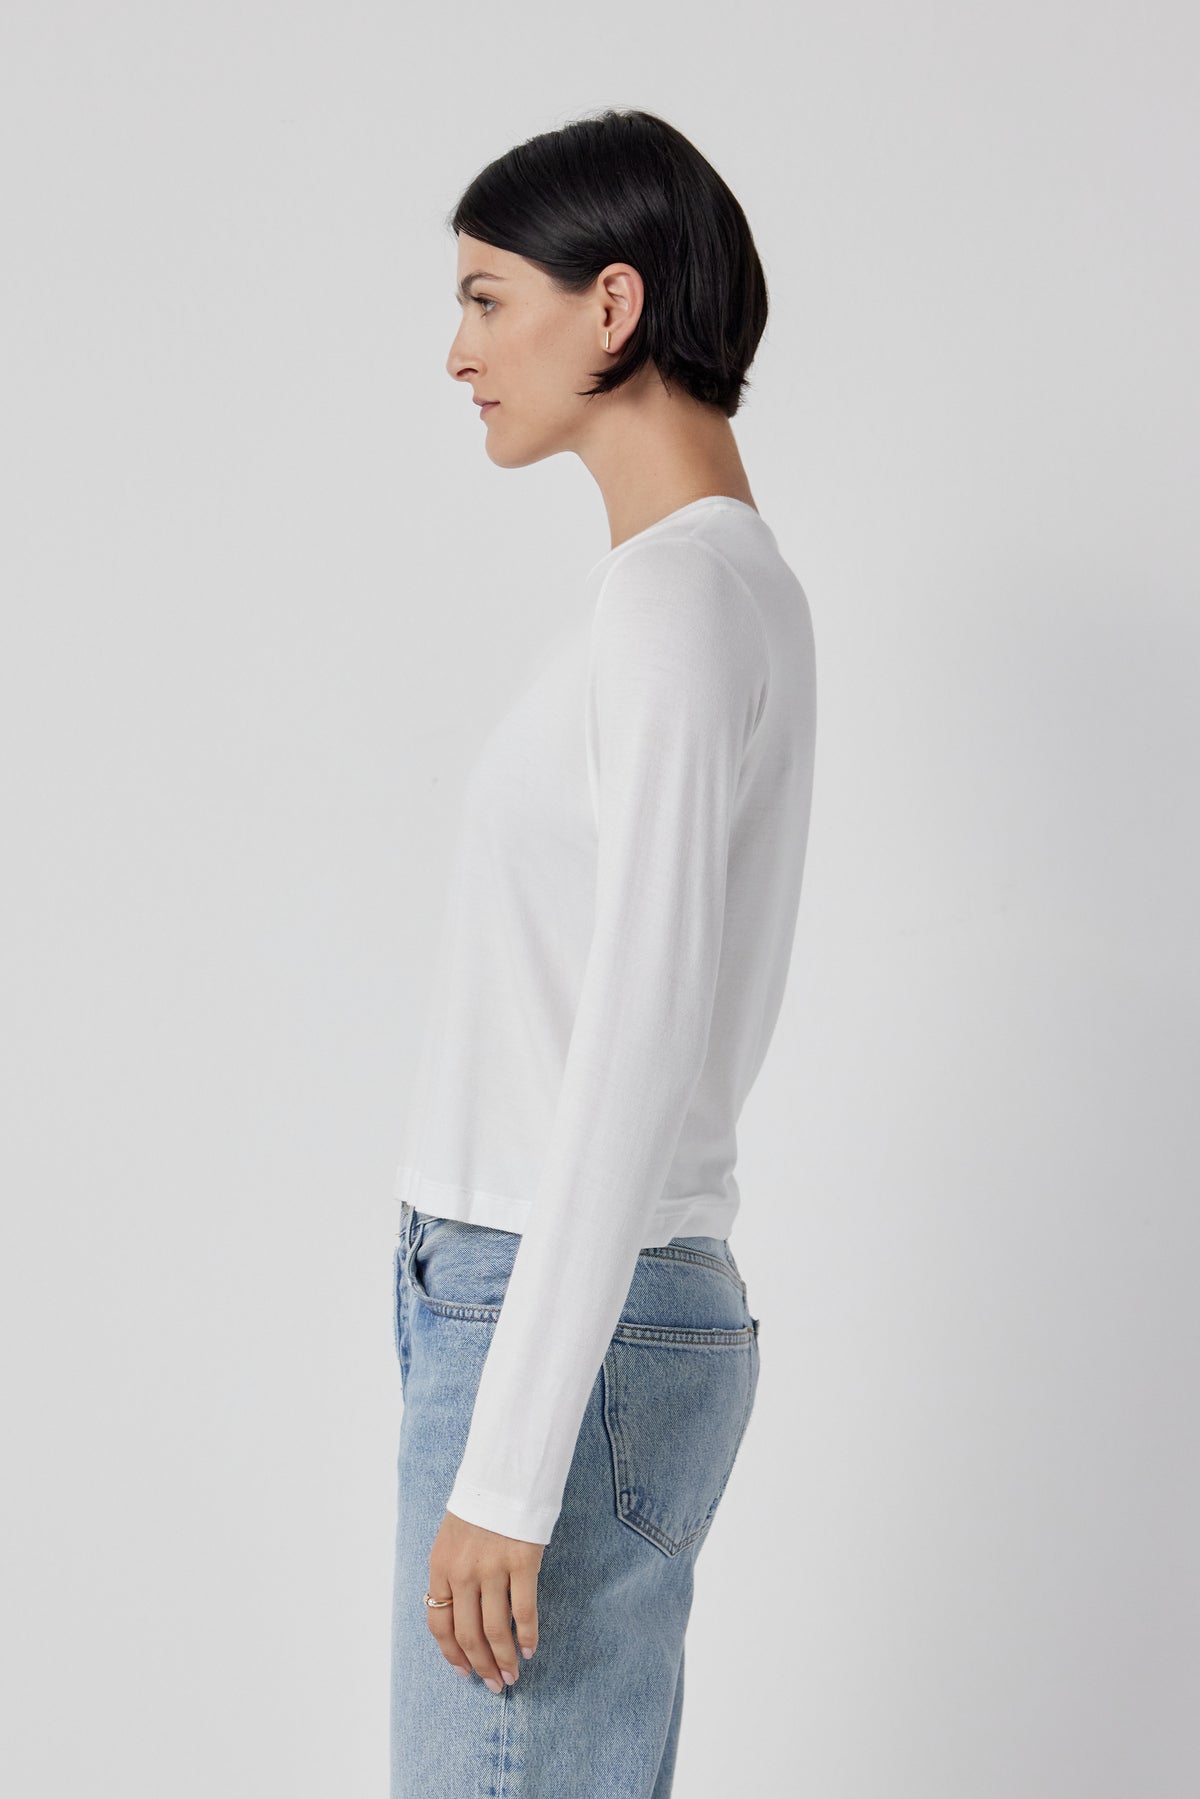 The back view of a woman wearing Velvet by Jenny Graham stretch jeans and a white long sleeved Pacifica Tee.-35416710643905